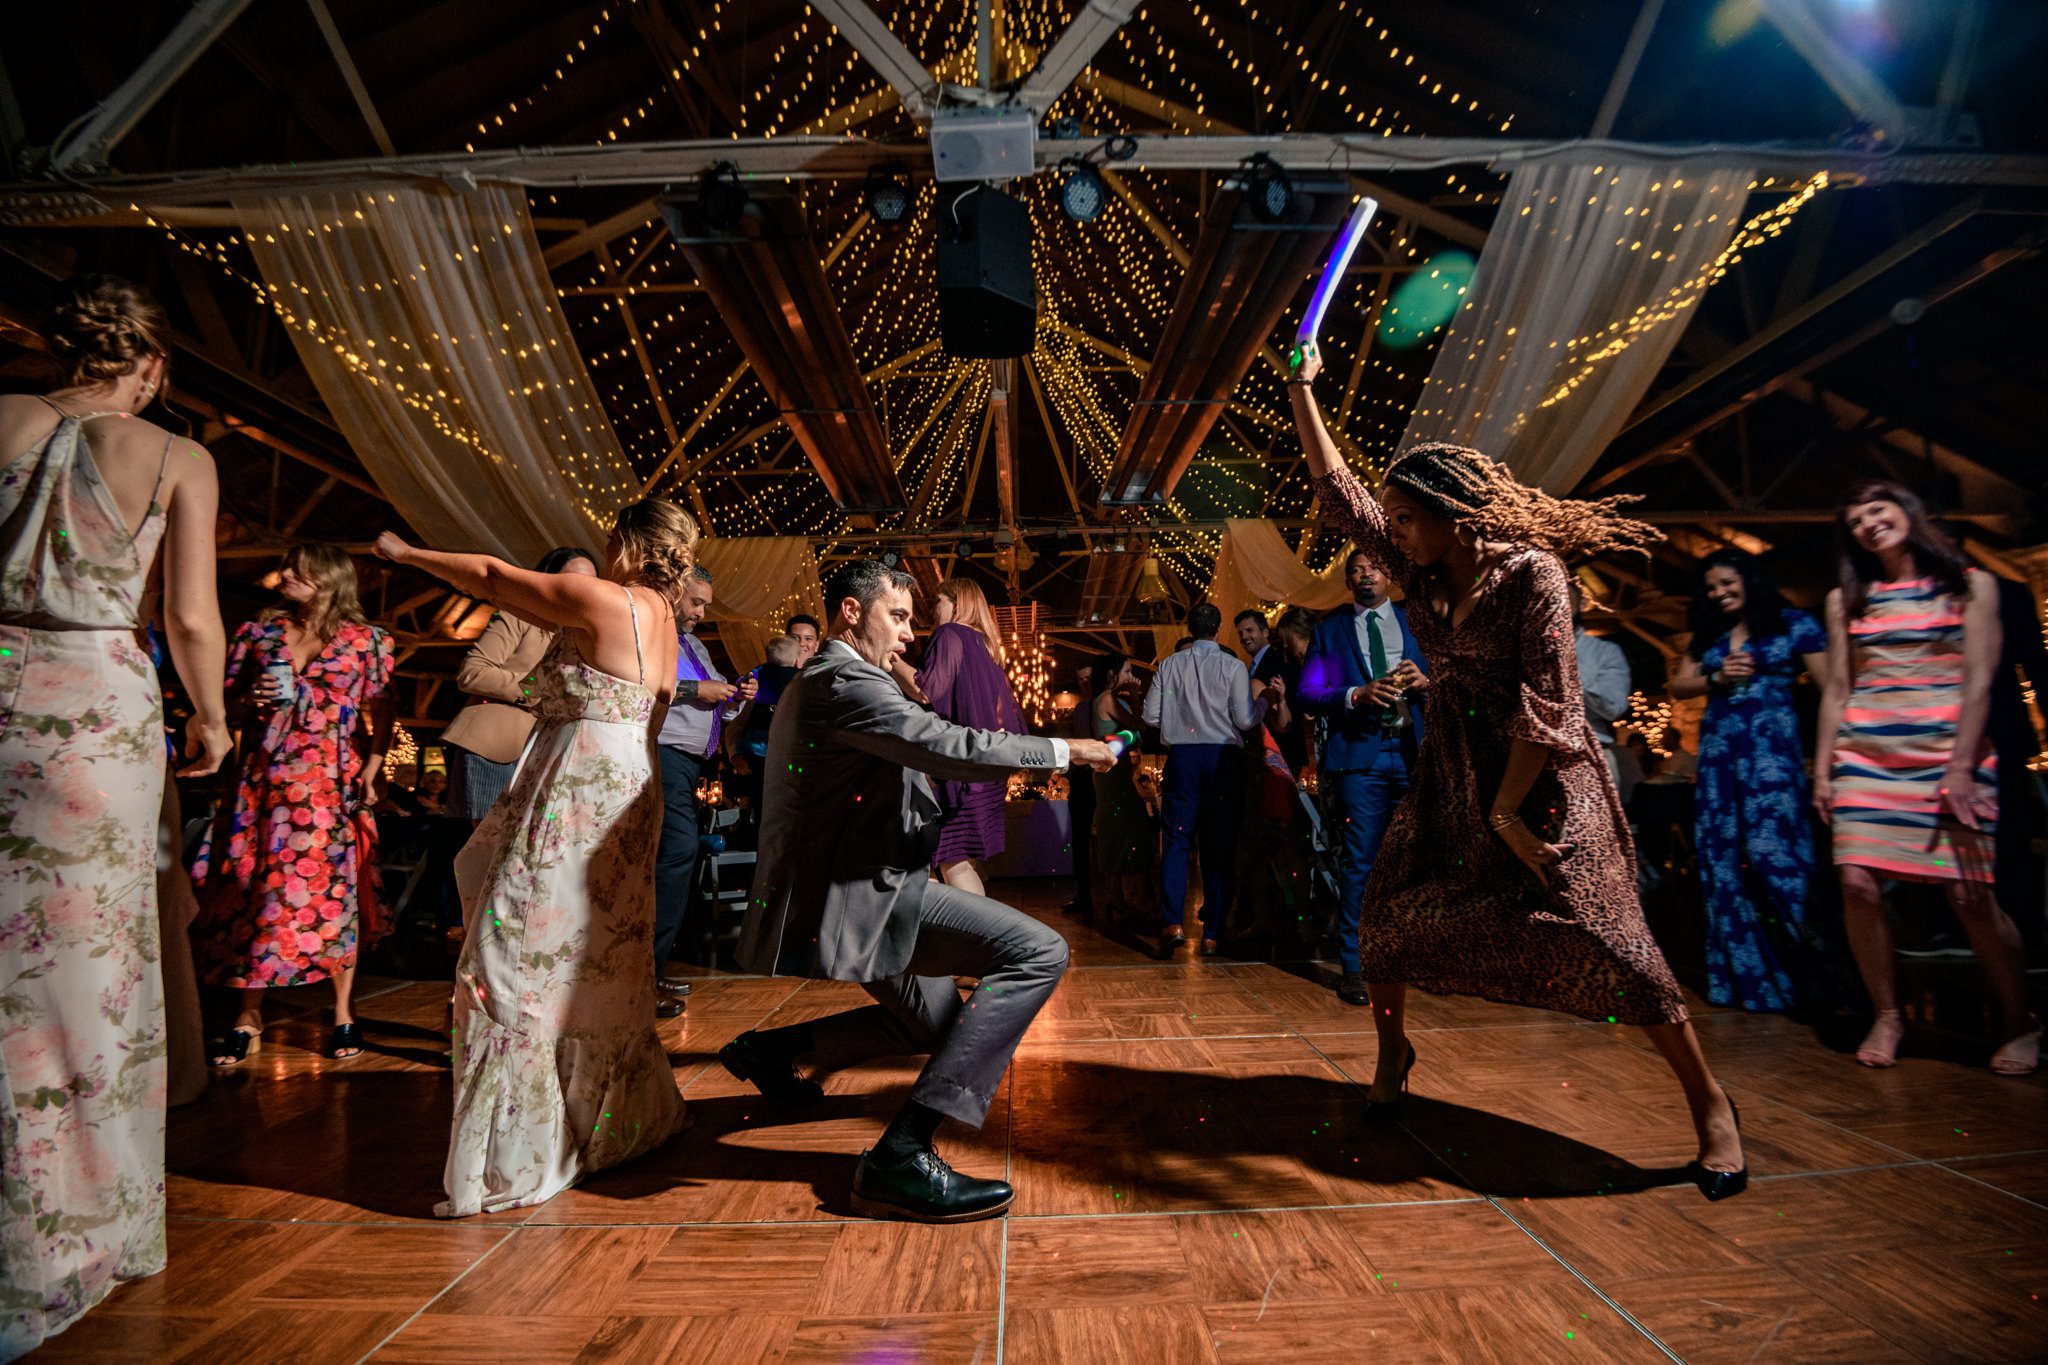 A documentary wedding photographer captures a group of people dancing at a wedding reception held at the Crest Pavilion.